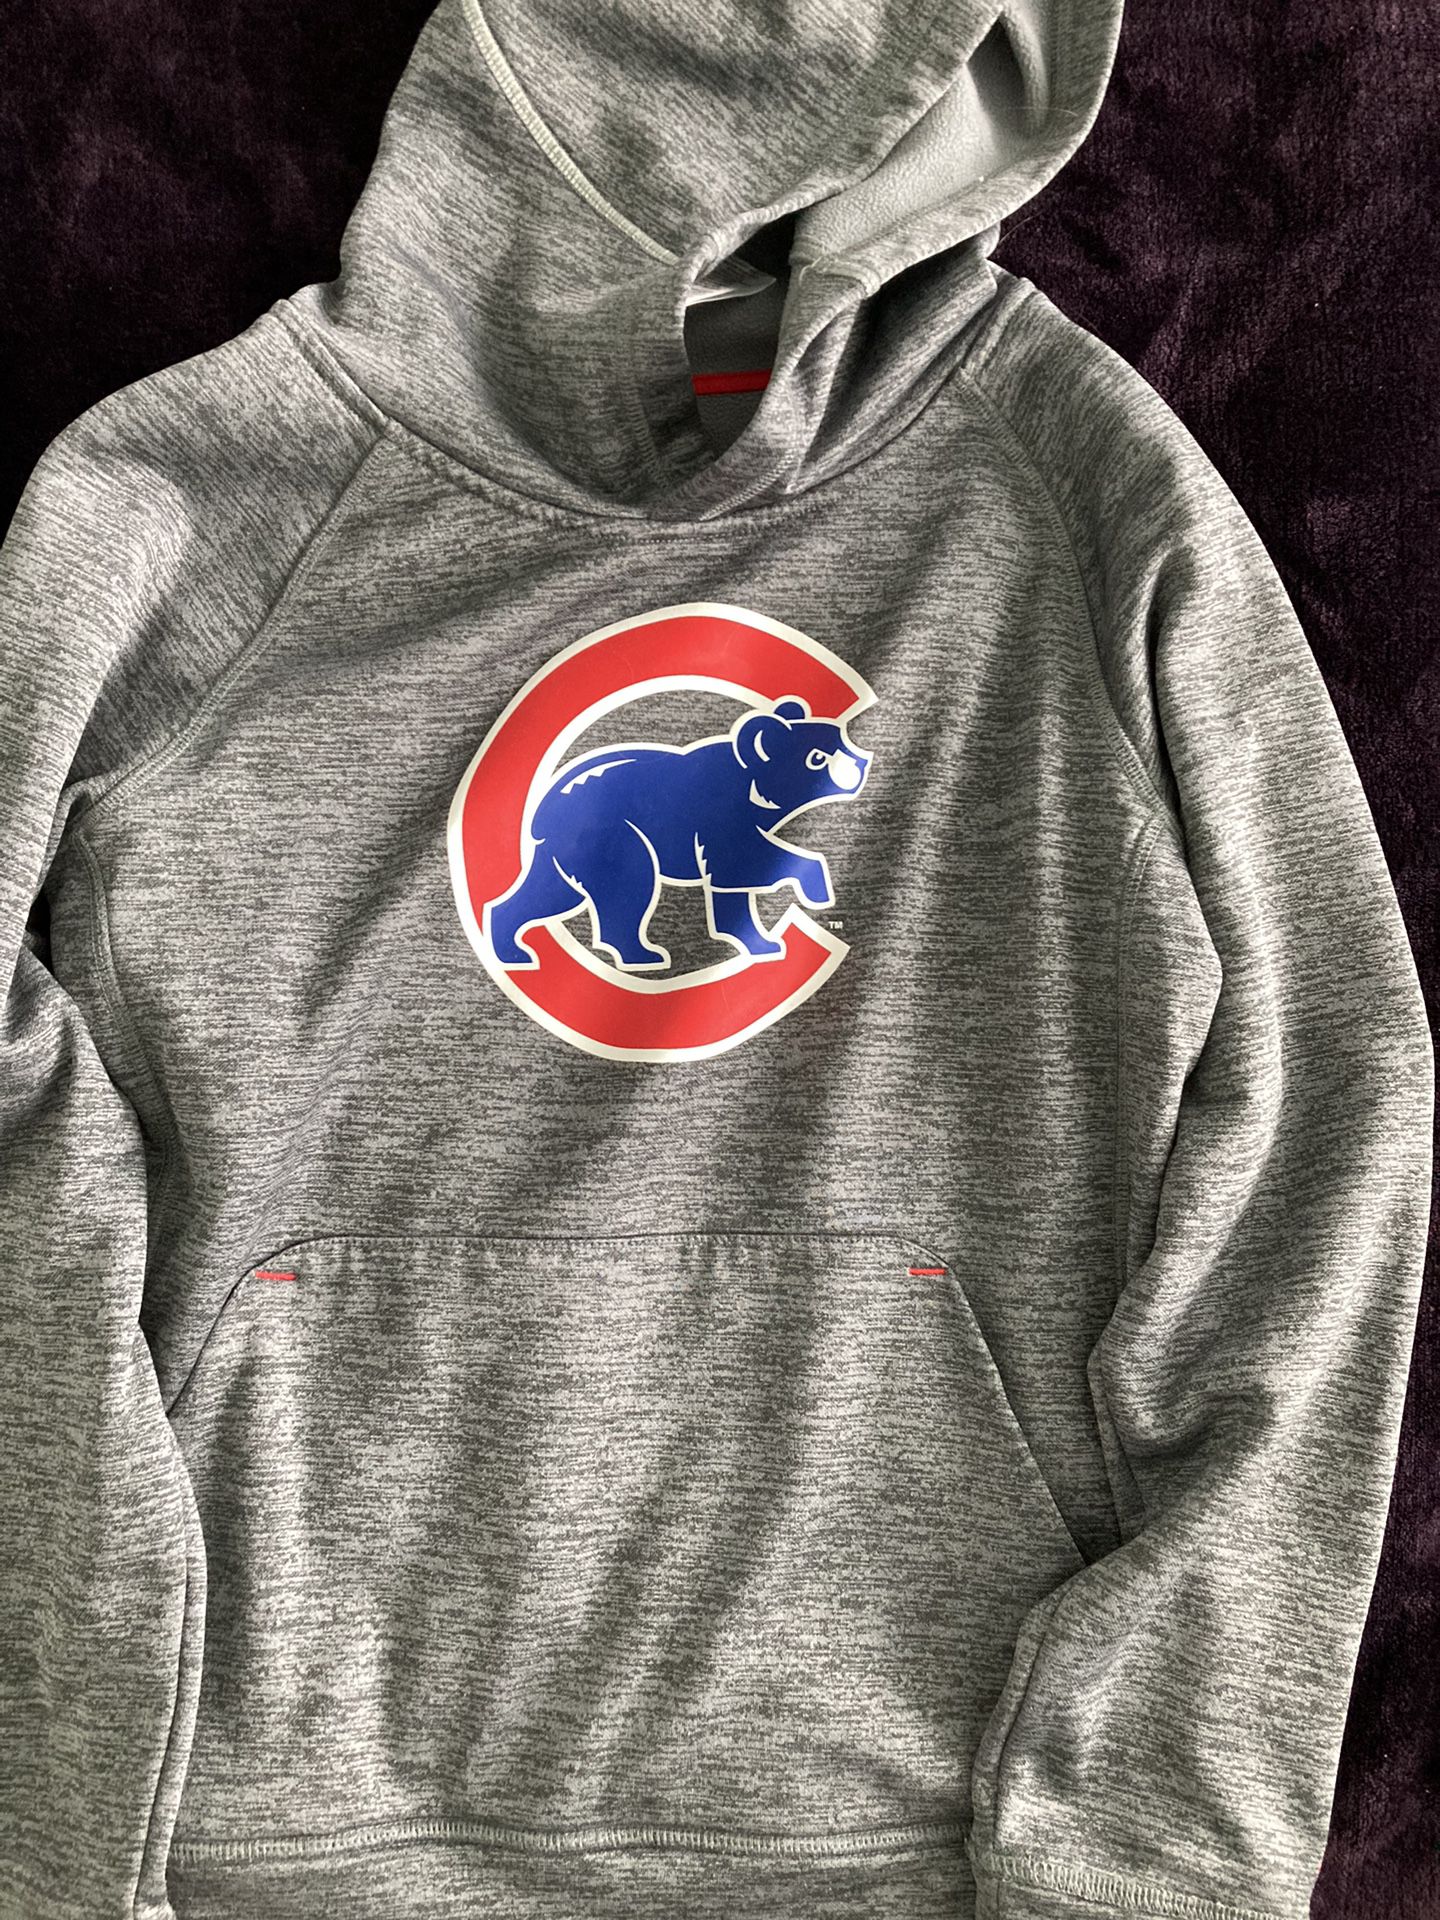 Chicago Cubs Youth Sweatshirt Size M